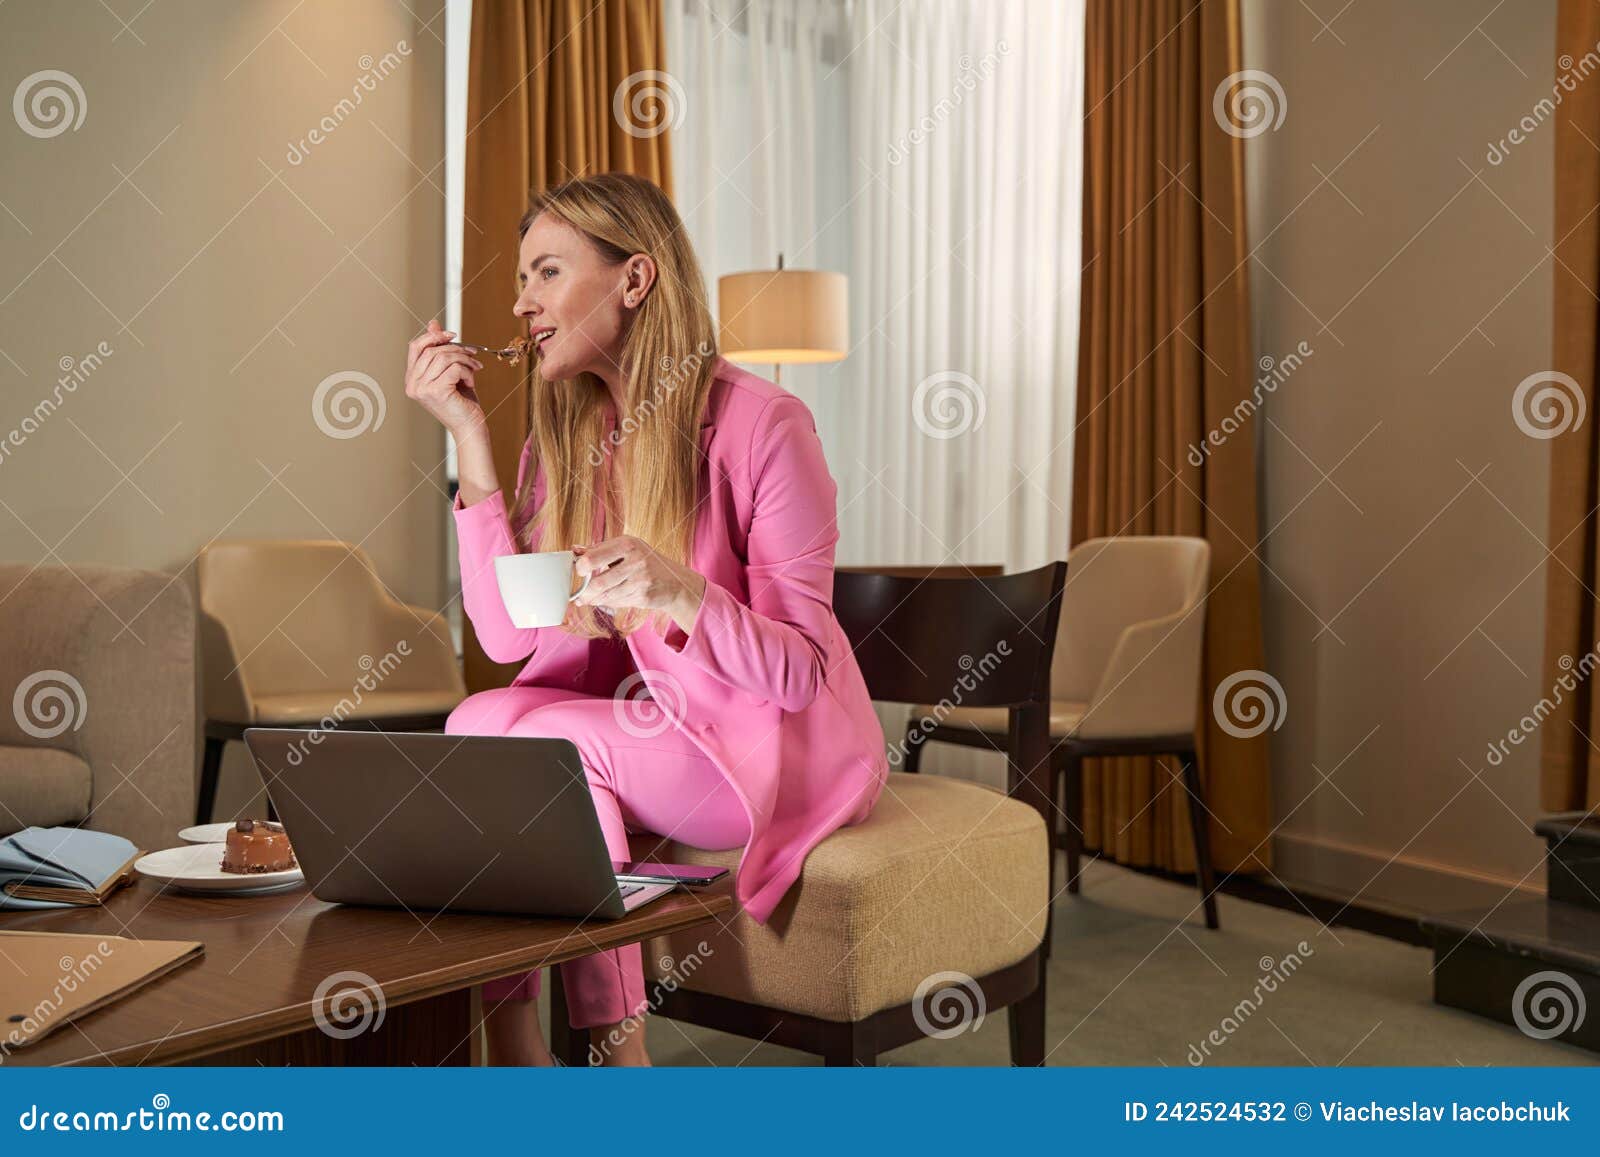 joyous lady in fancy pink outfit eating dessert at hotel